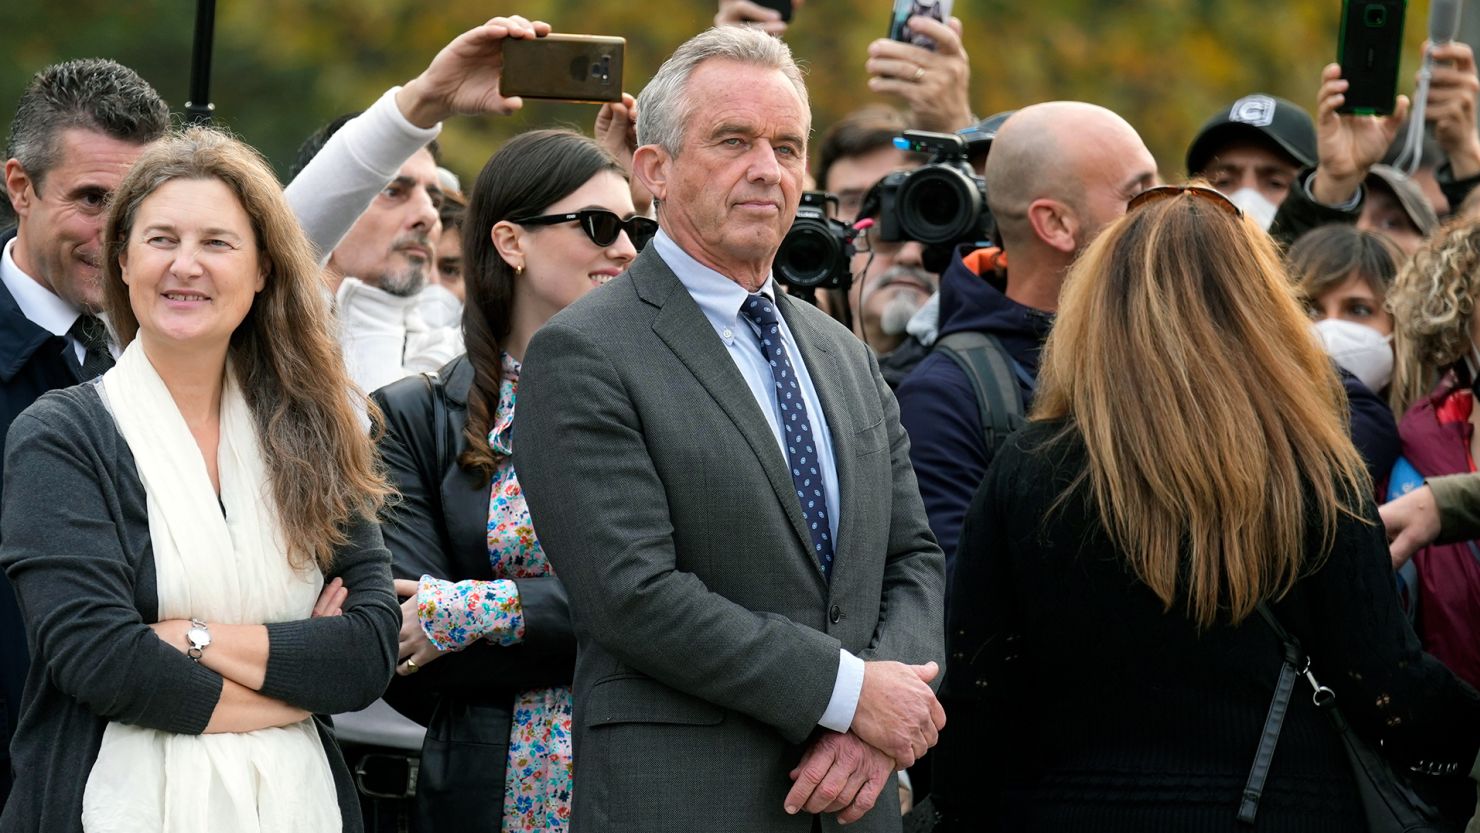 Robert F. Kennedy Jr. participates in a protest against the Covid-19 vaccination green pass in Milan, Italy, on November 13, 2021.